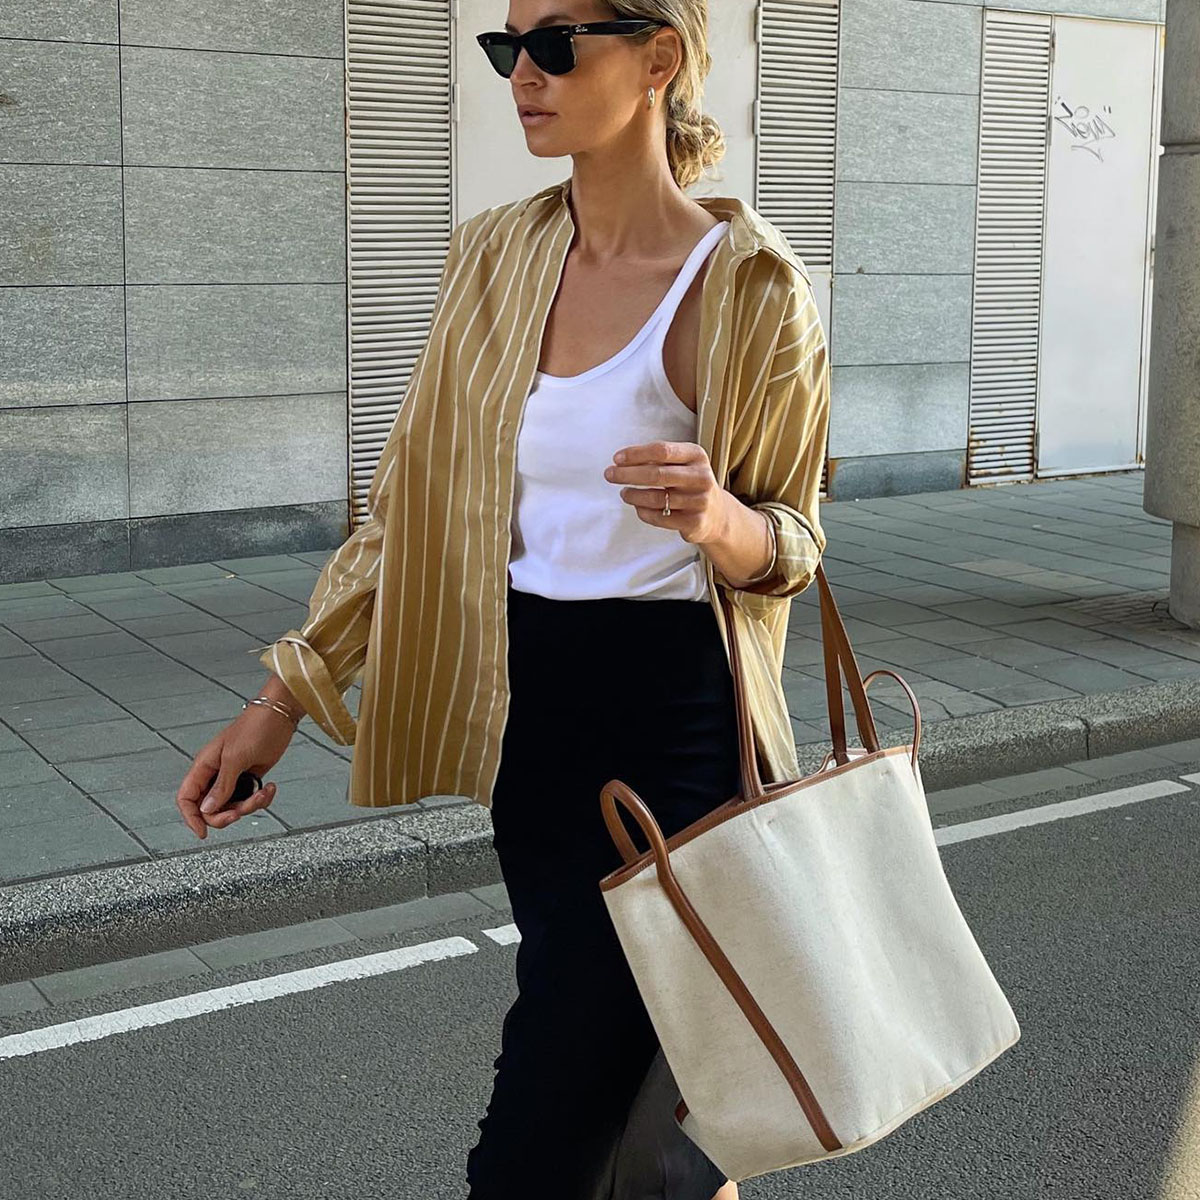 Simplicity Is My Summer Style Motto—7 Chic and Easy Outfits I'm